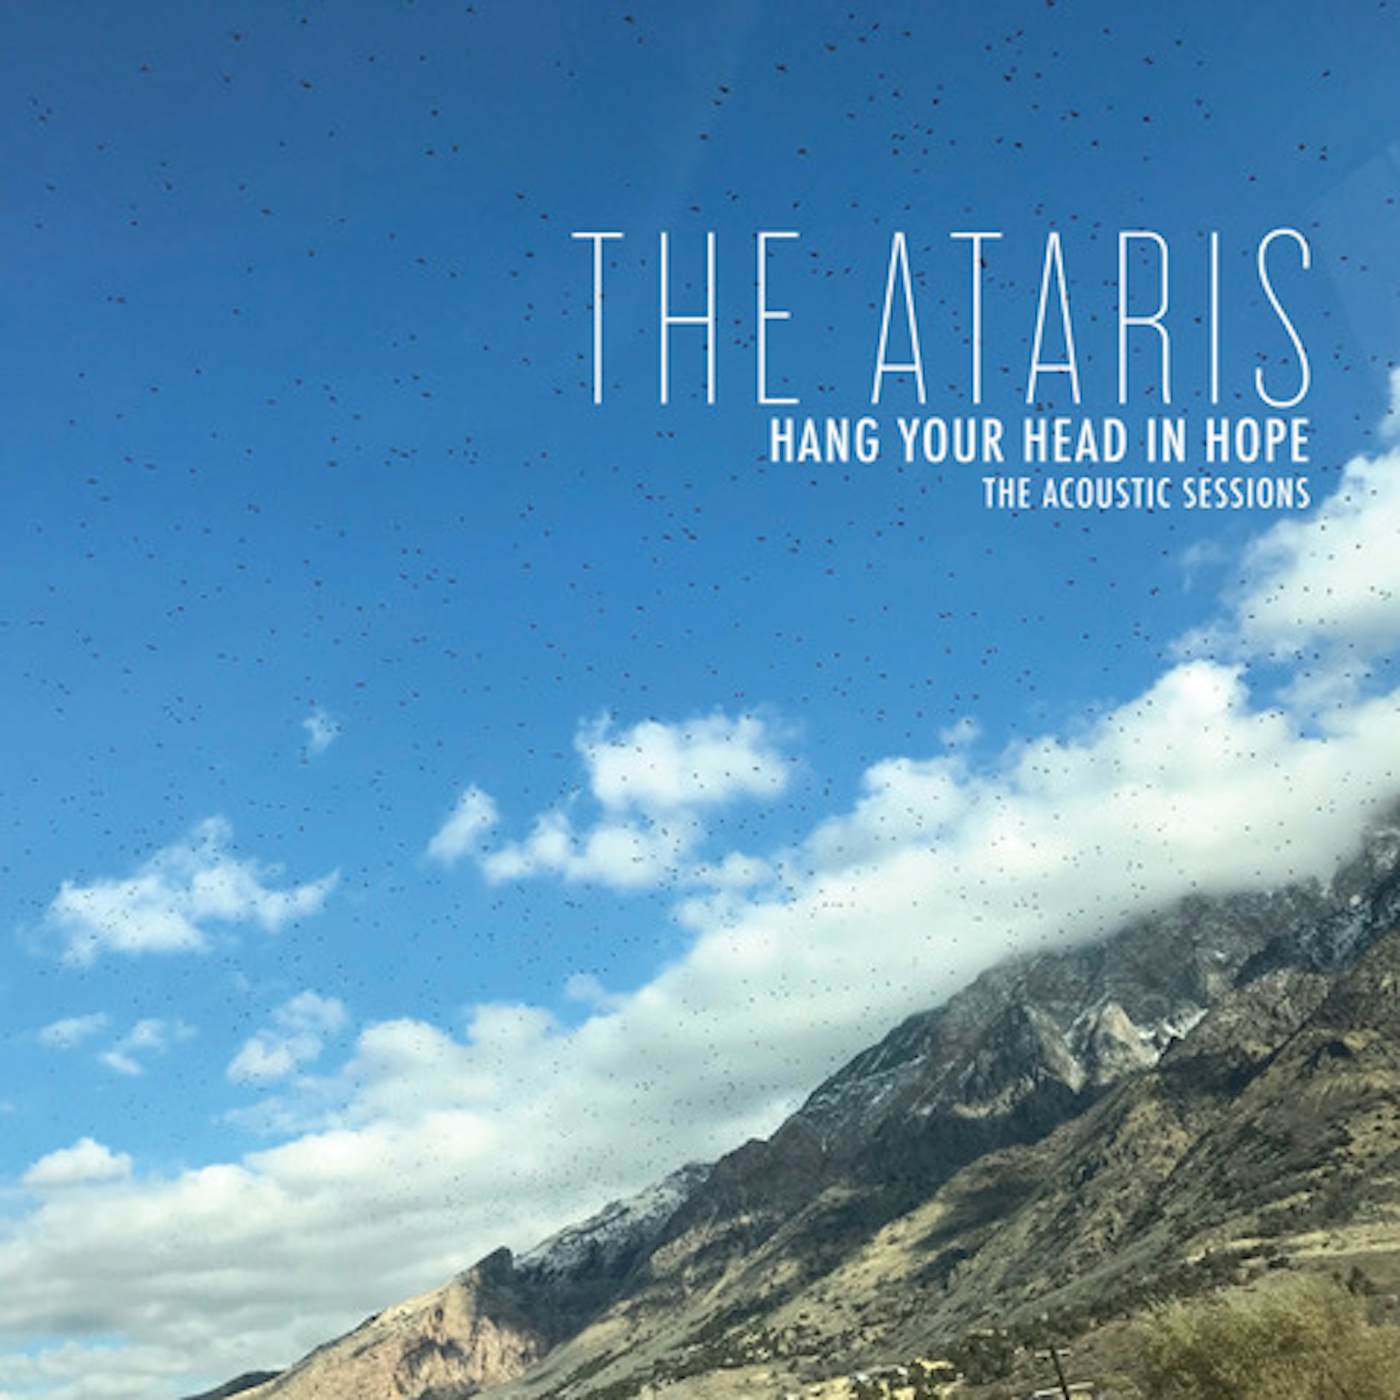 The Ataris HANG YOUR HEAD IN HOPE - THE ACOUSTIC SESSIONS CD